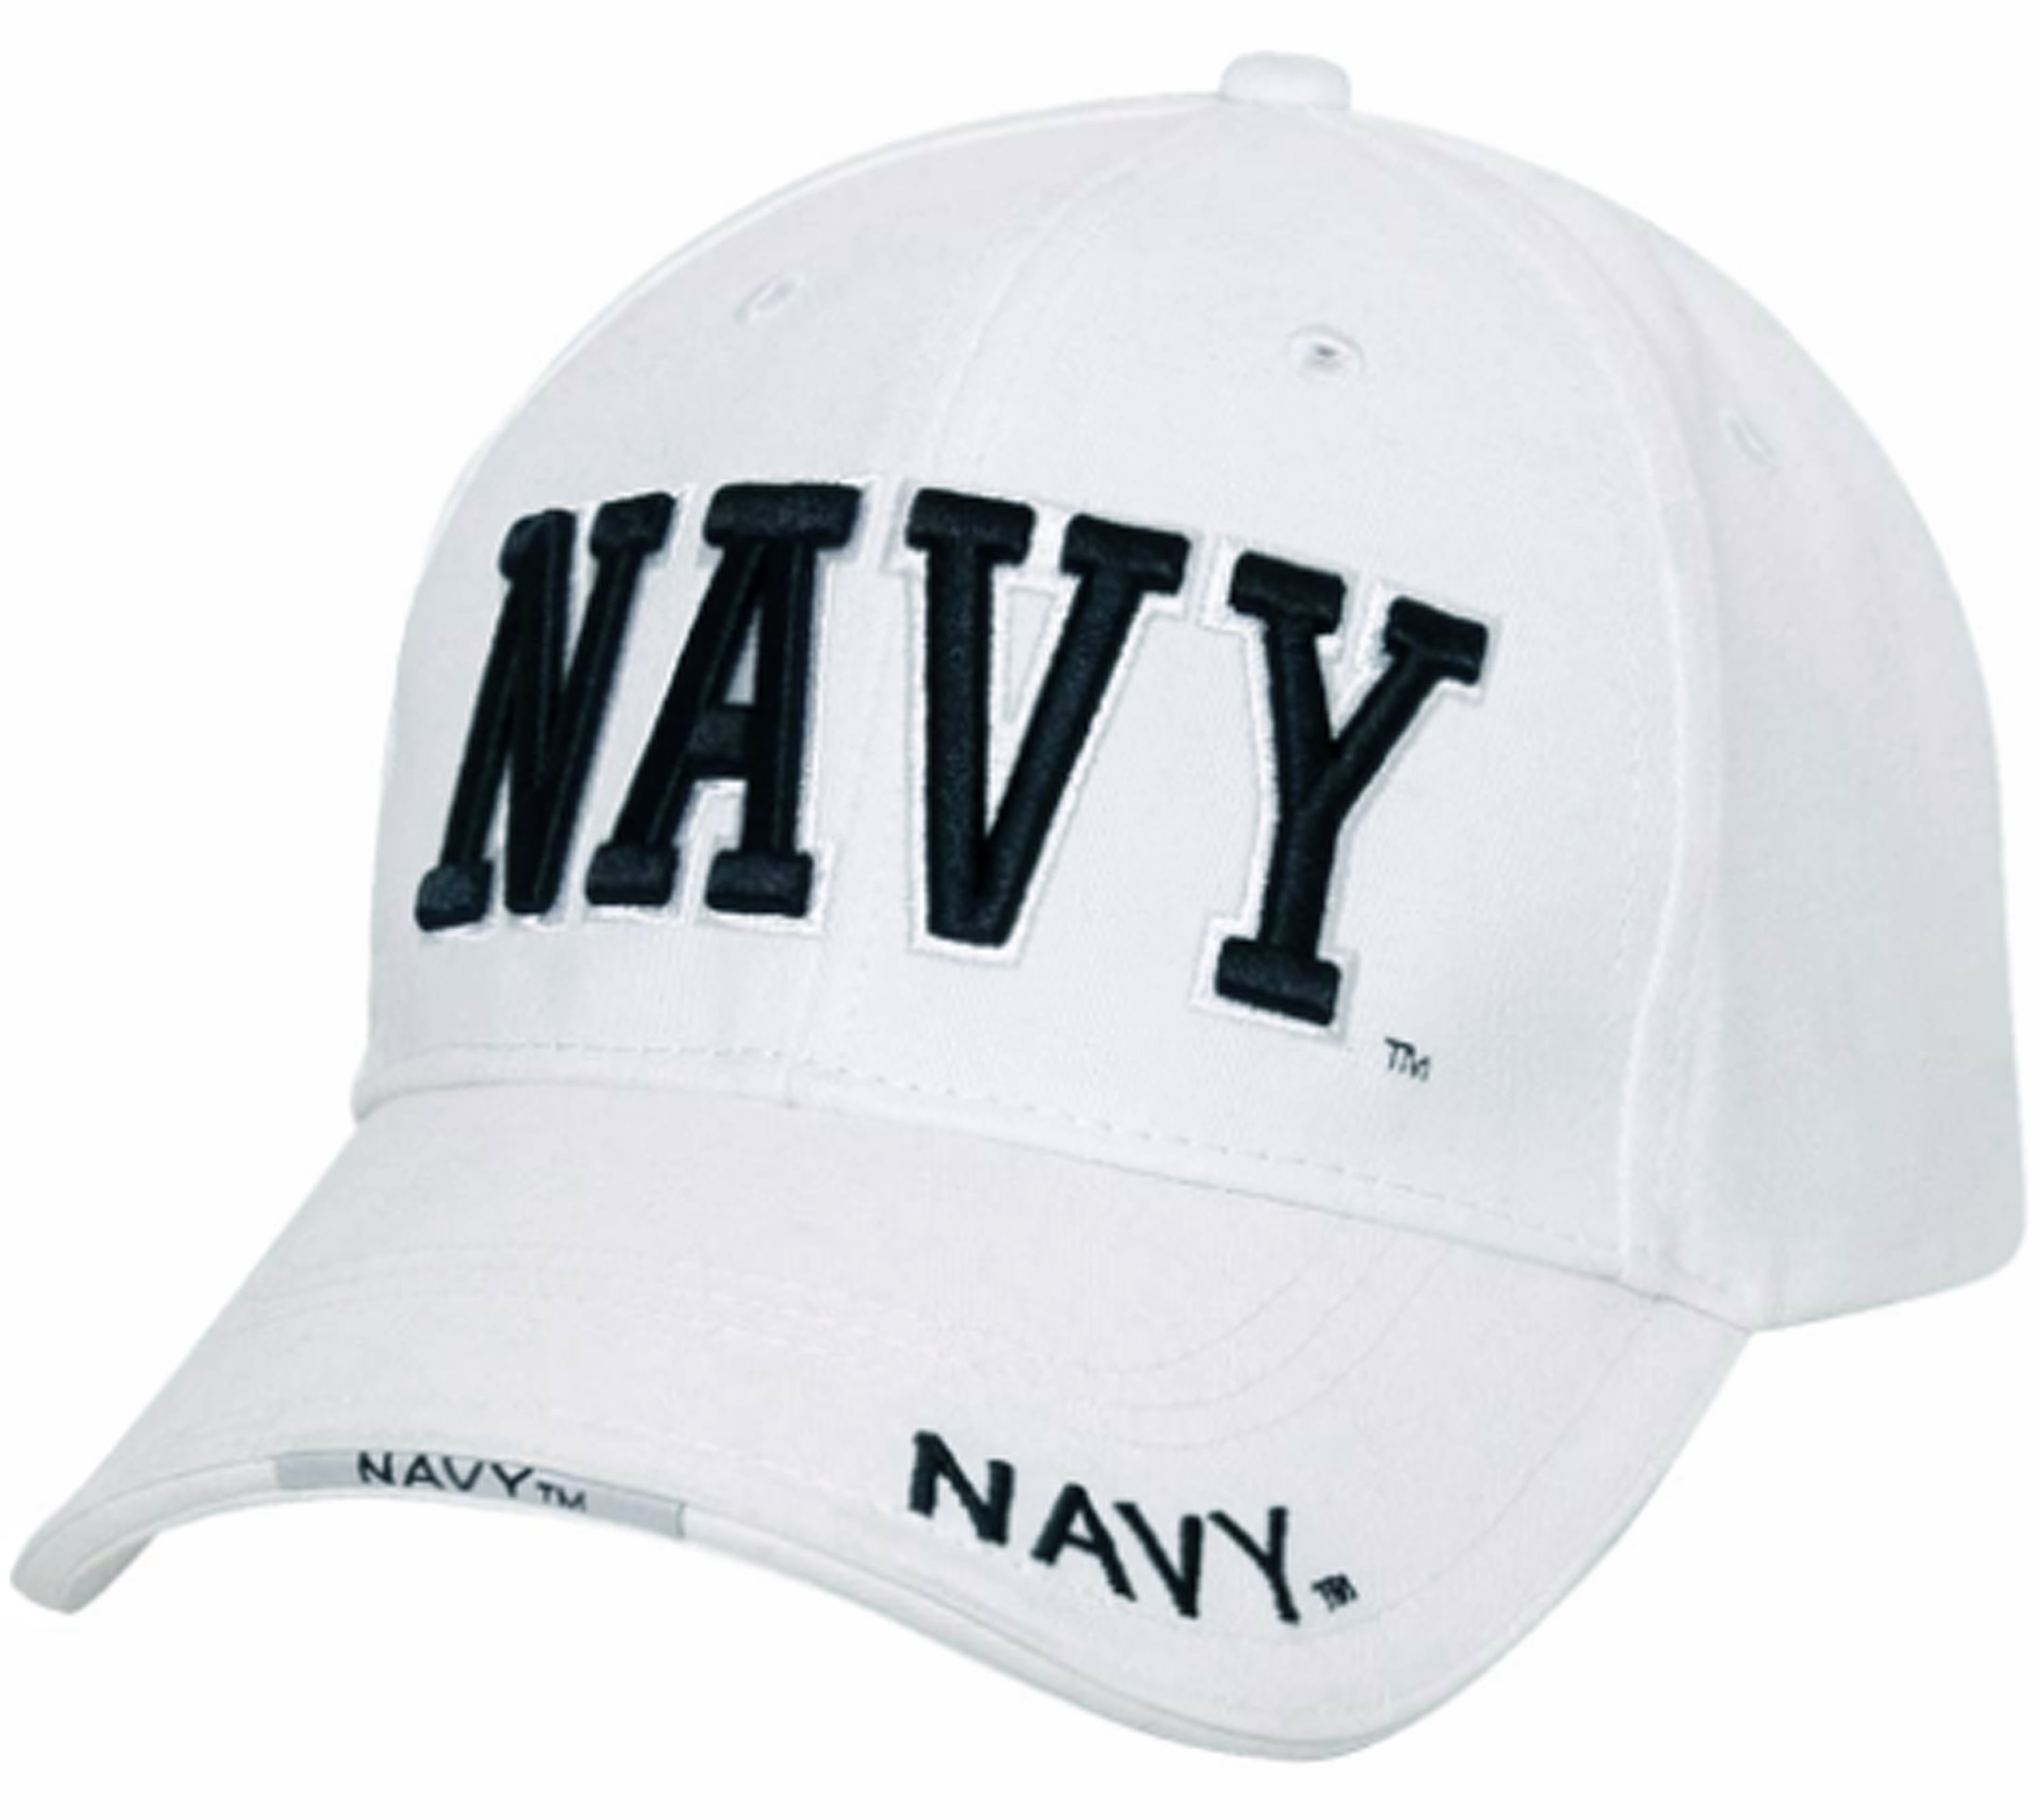 hed indelukke Optage White Navy Veteran Baseball Cap Vet Embroidered Blue Letters, Men WomenOne  Size Adjustable Relaxed Fit for Medium, Large, XL and Some XXL - Walmart.com